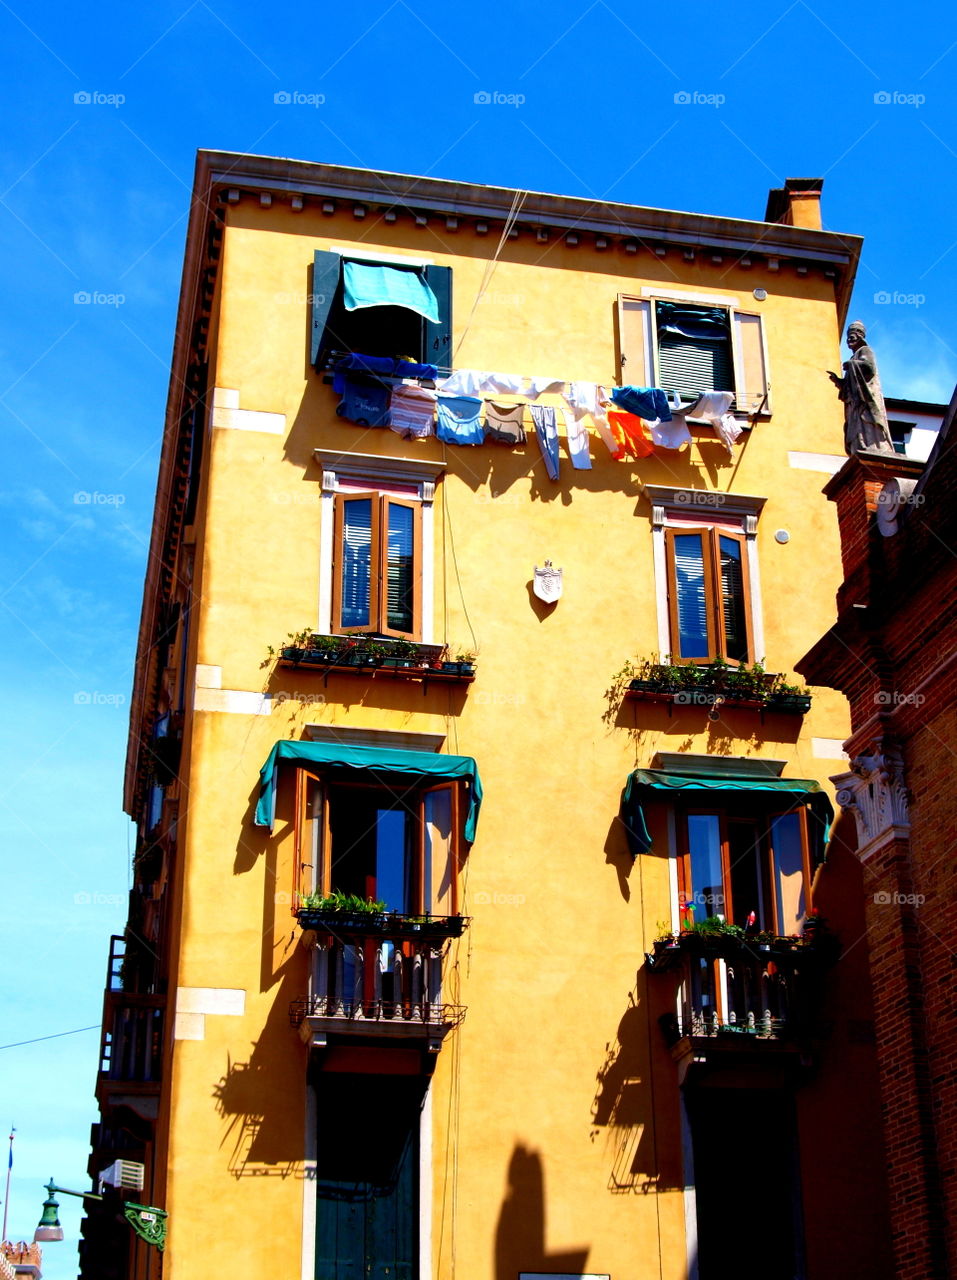 laundry drying on a yellow Italian house